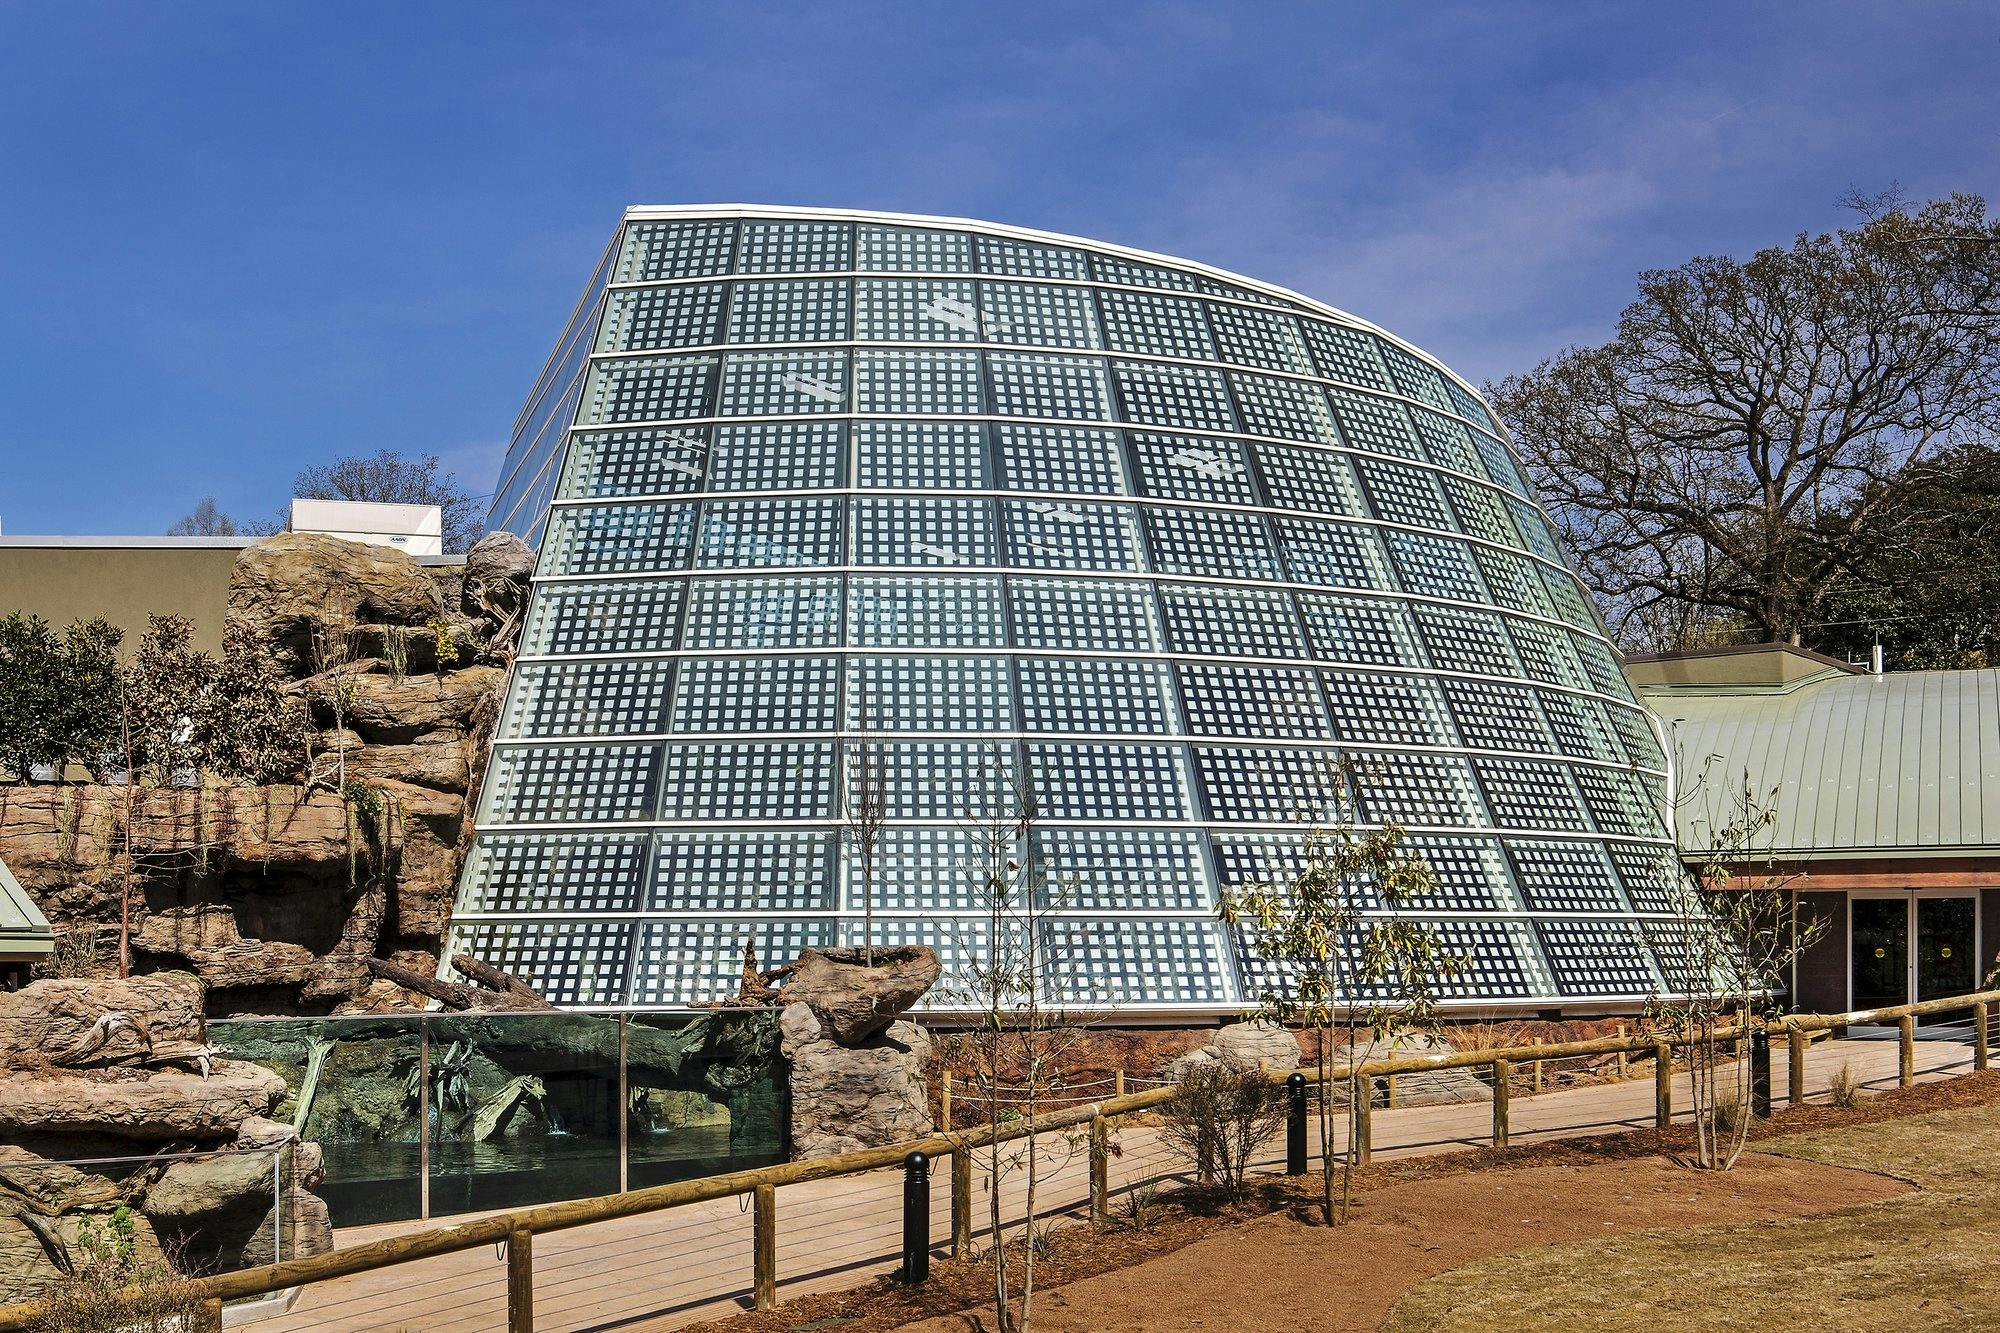 A reptile exhibit at a zoo with a glass roof. 	